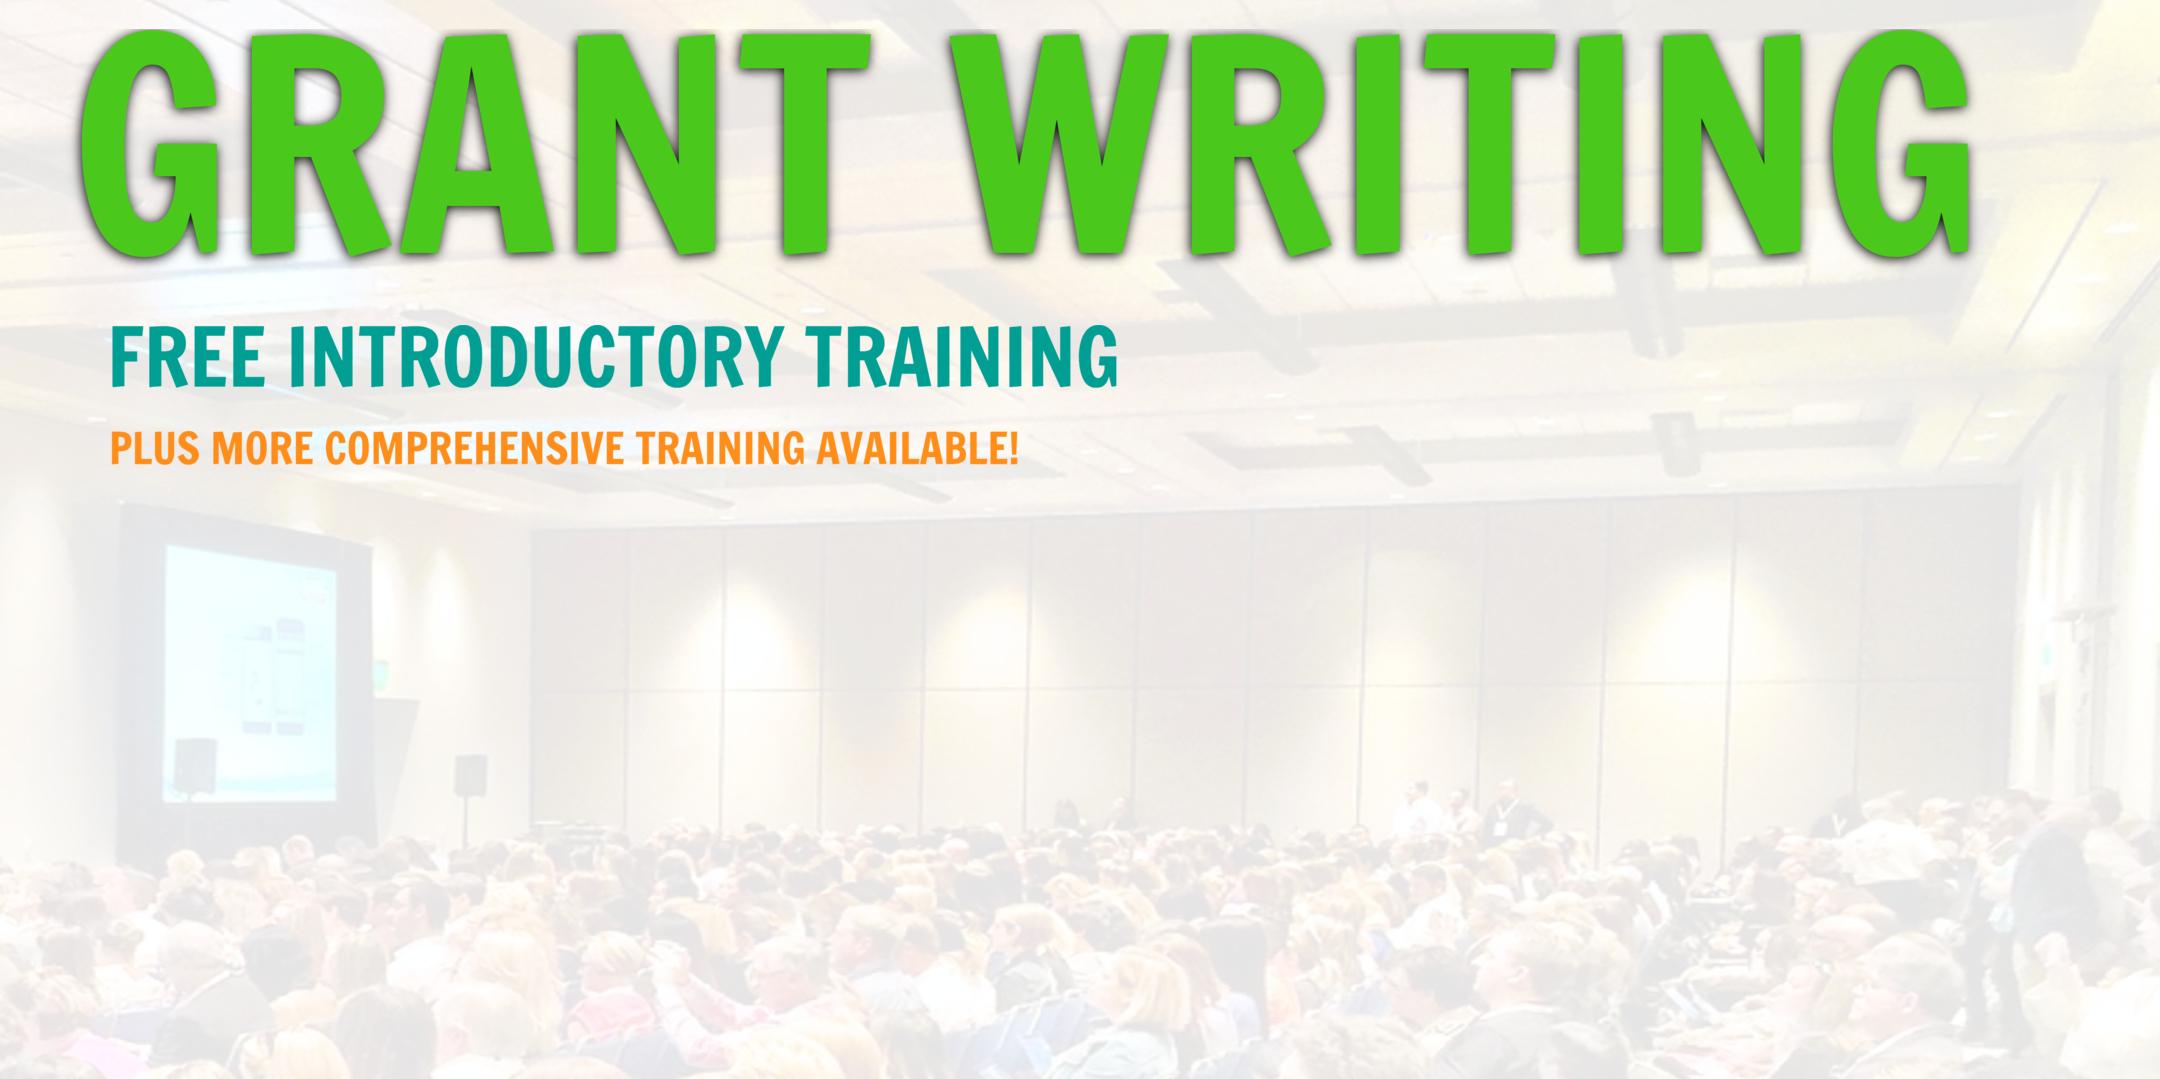 Grant Writing Introductory Training... Westminster, Colorado